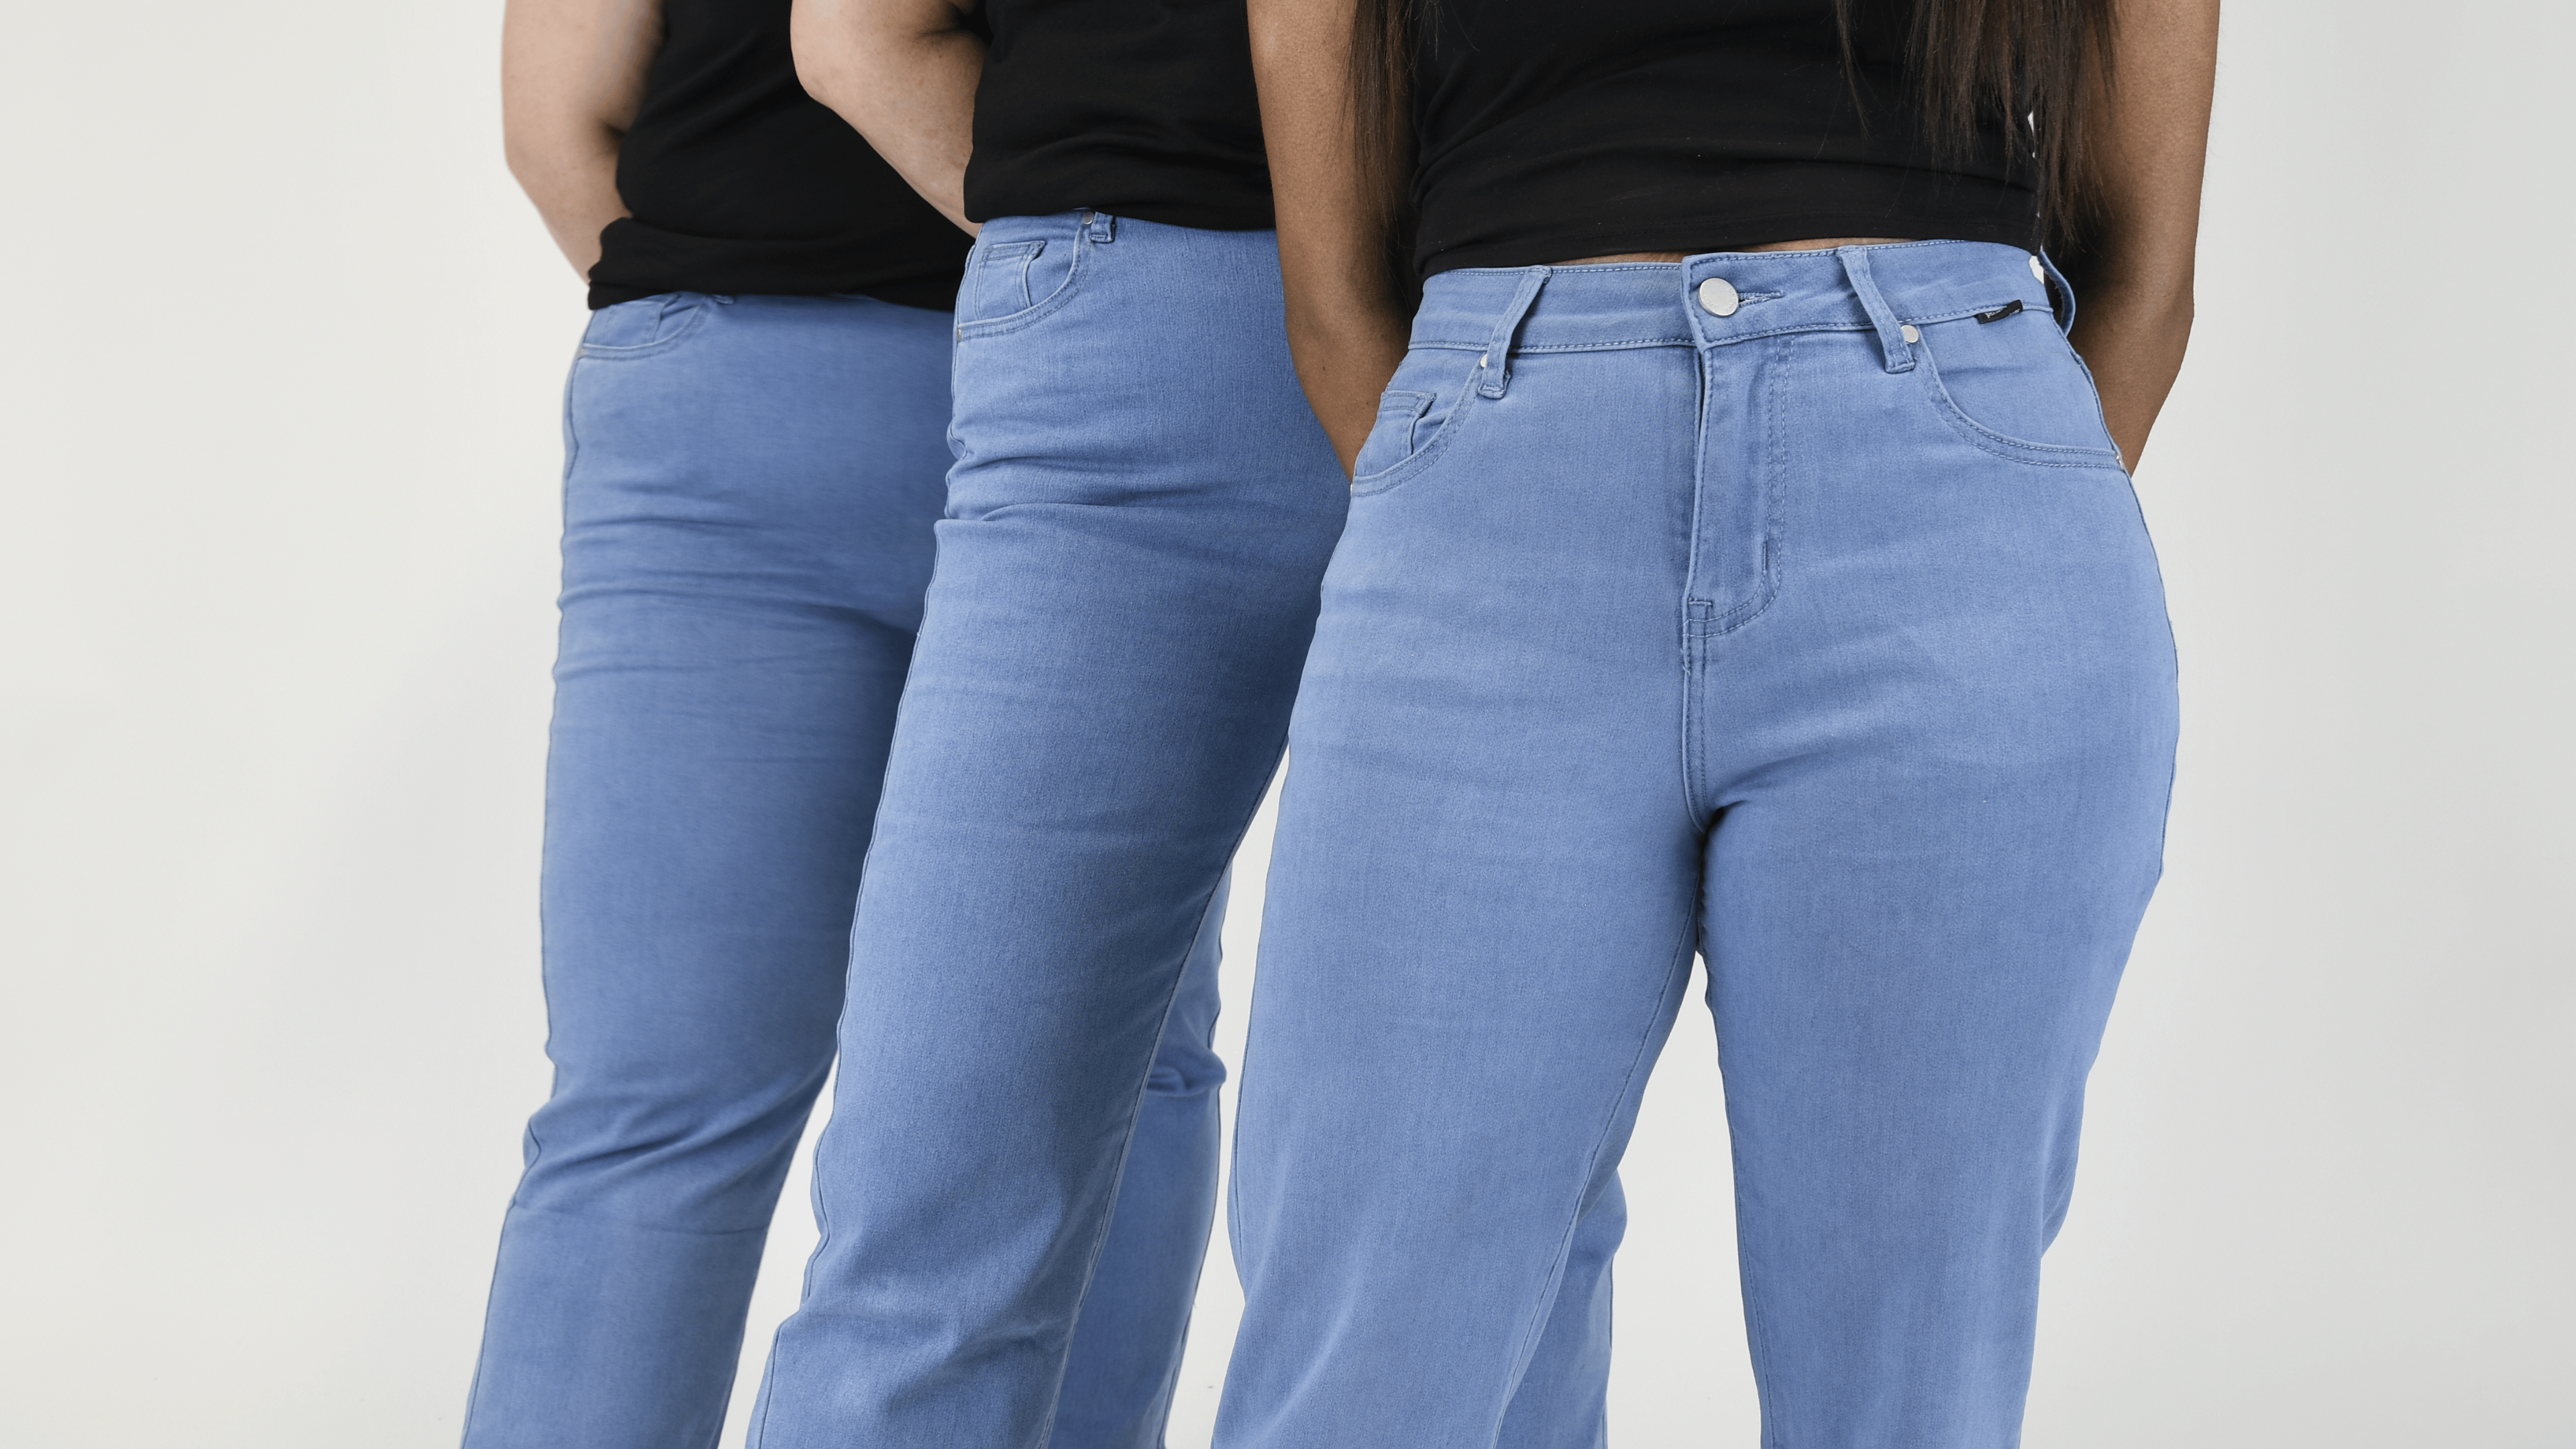 Jeans for Ladies: Find the perfect pair of jeans for your body